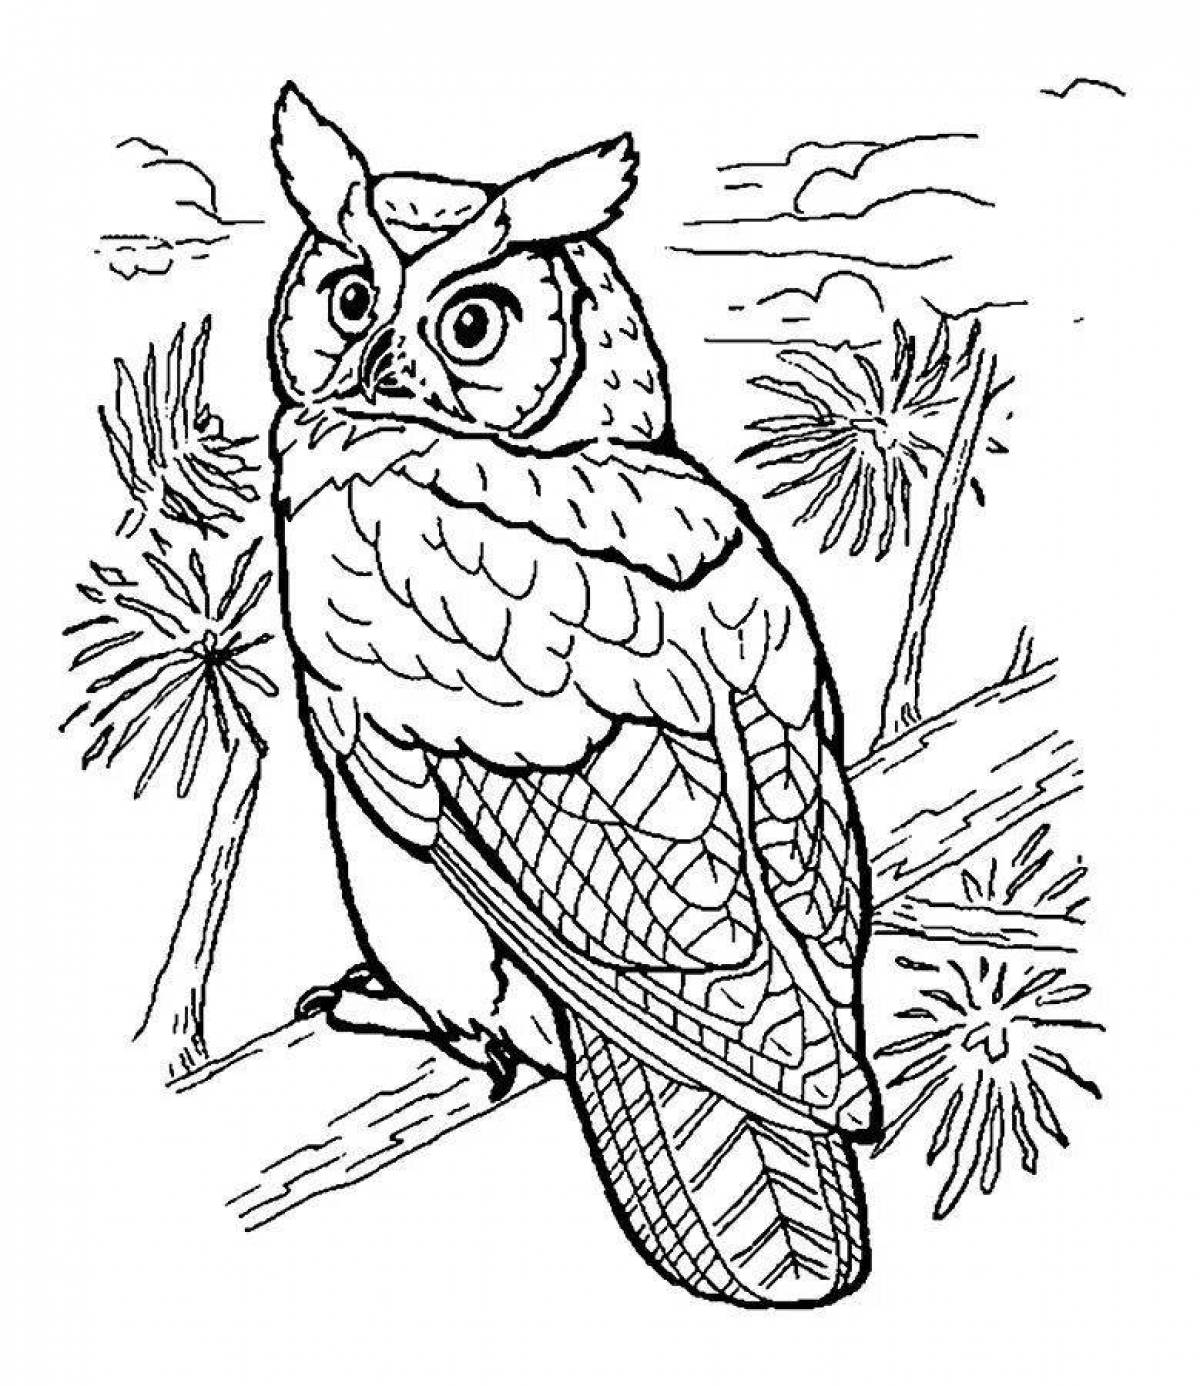 Coloring page hypnotic owl on a tree